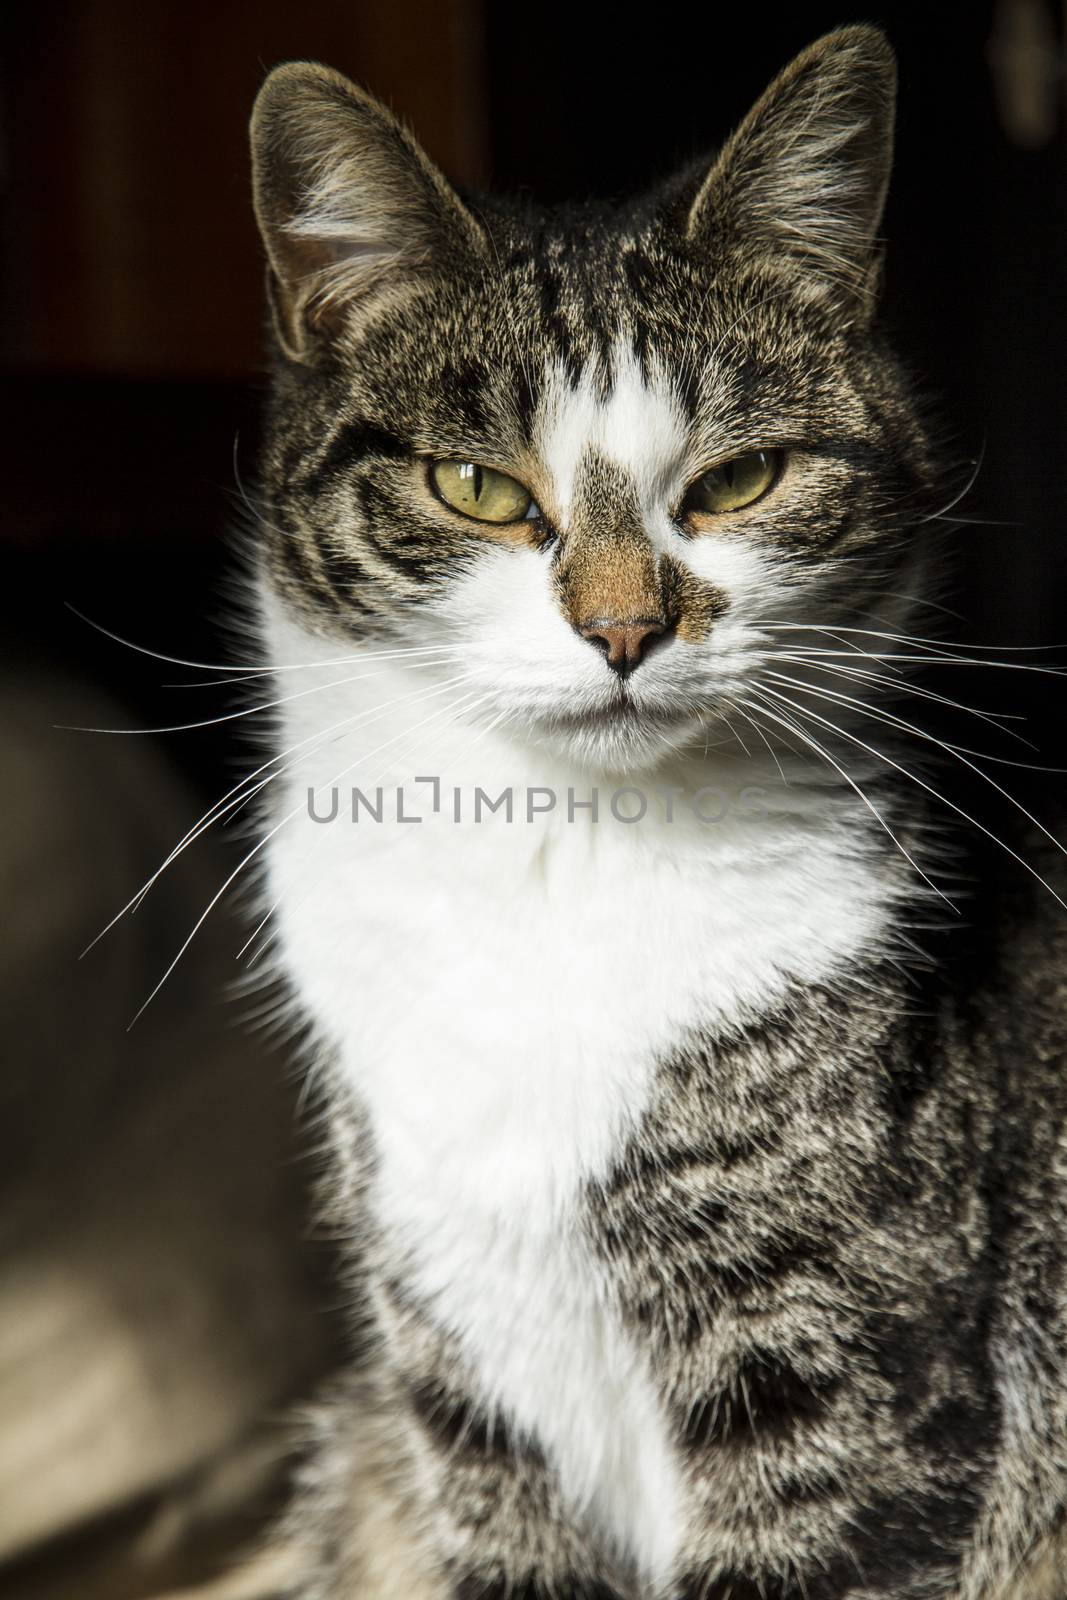 loving cat stands proudly posing in front of the lens with an almost defiant look